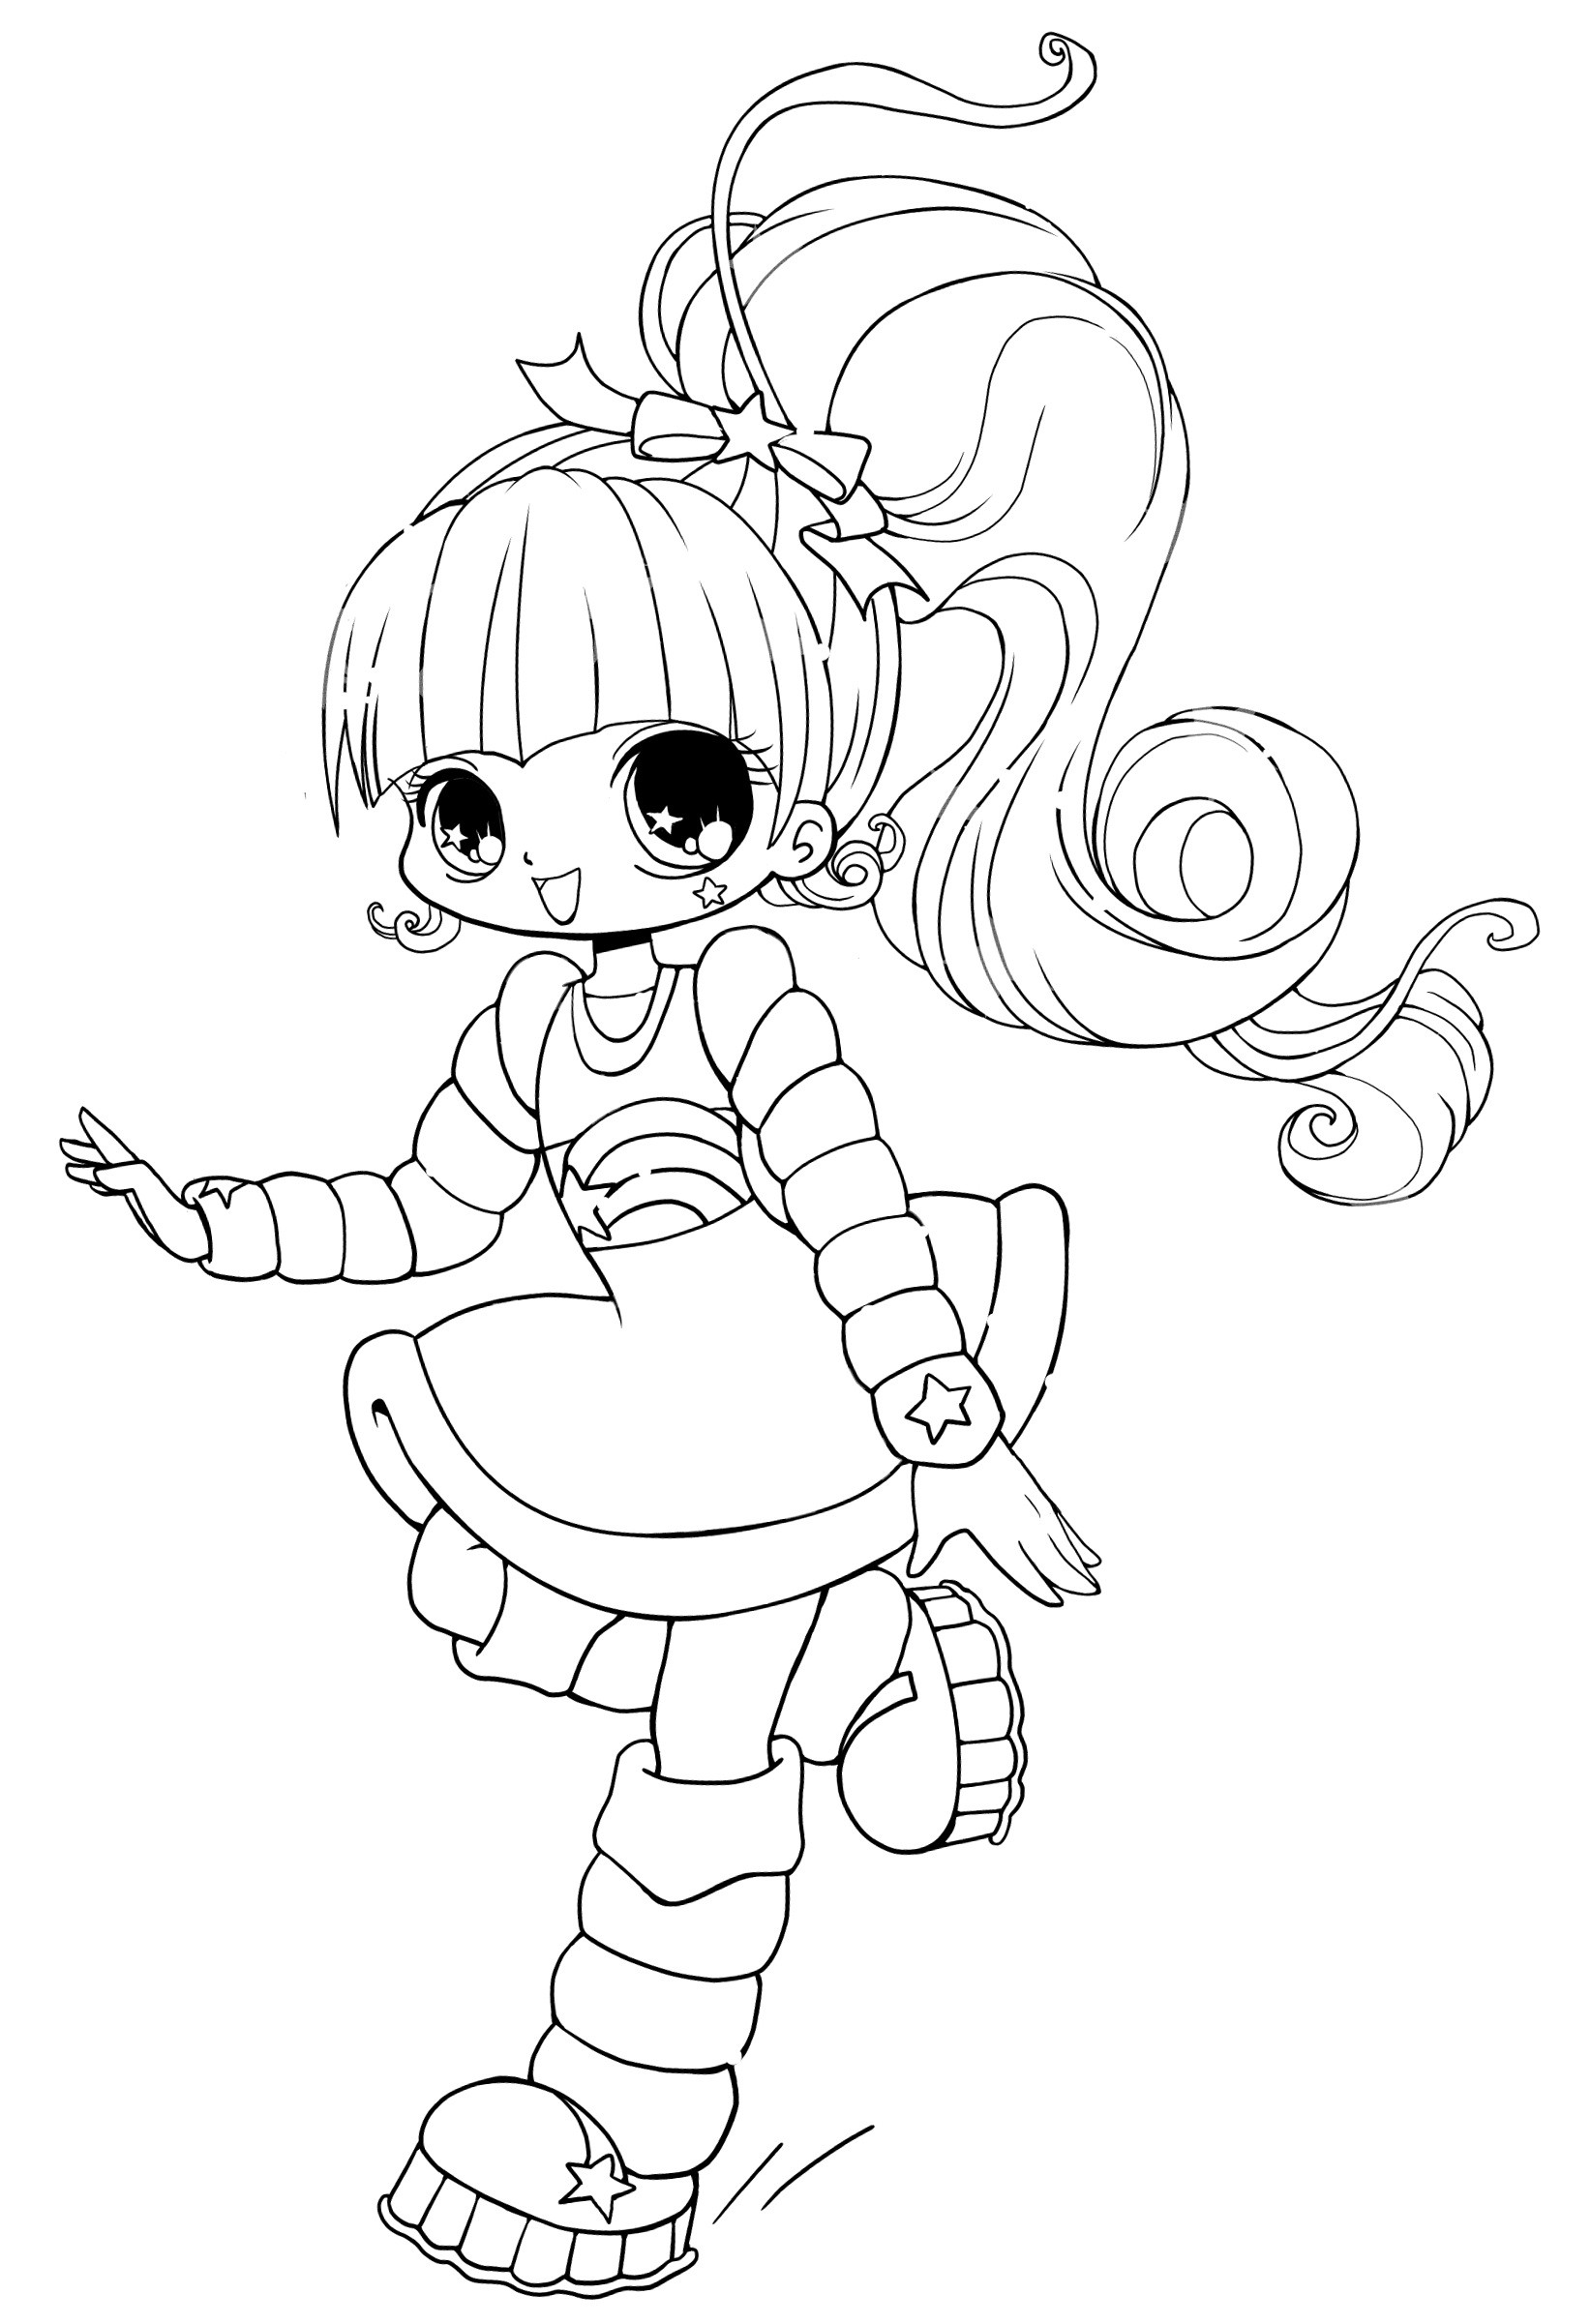 Cute Anime Girls Coloring Pages
 Free Printable Chibi Coloring Pages For Kids